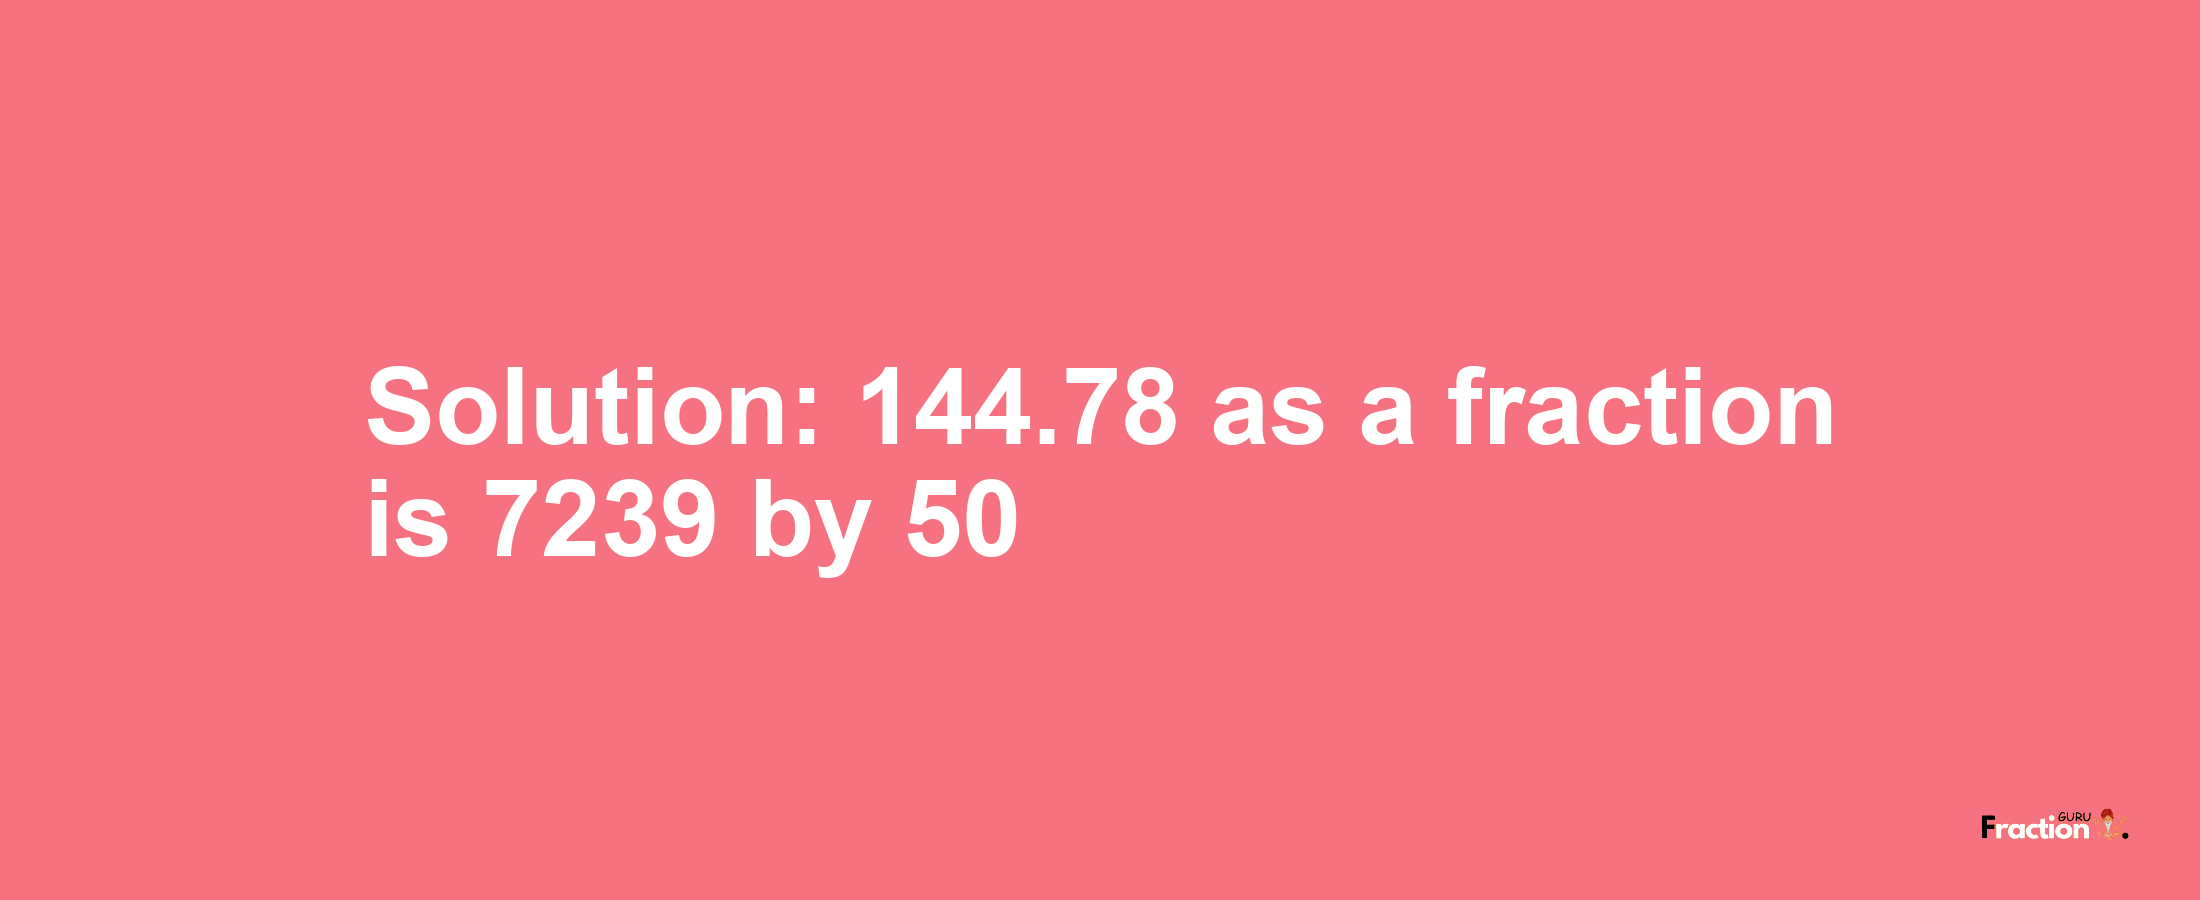 Solution:144.78 as a fraction is 7239/50